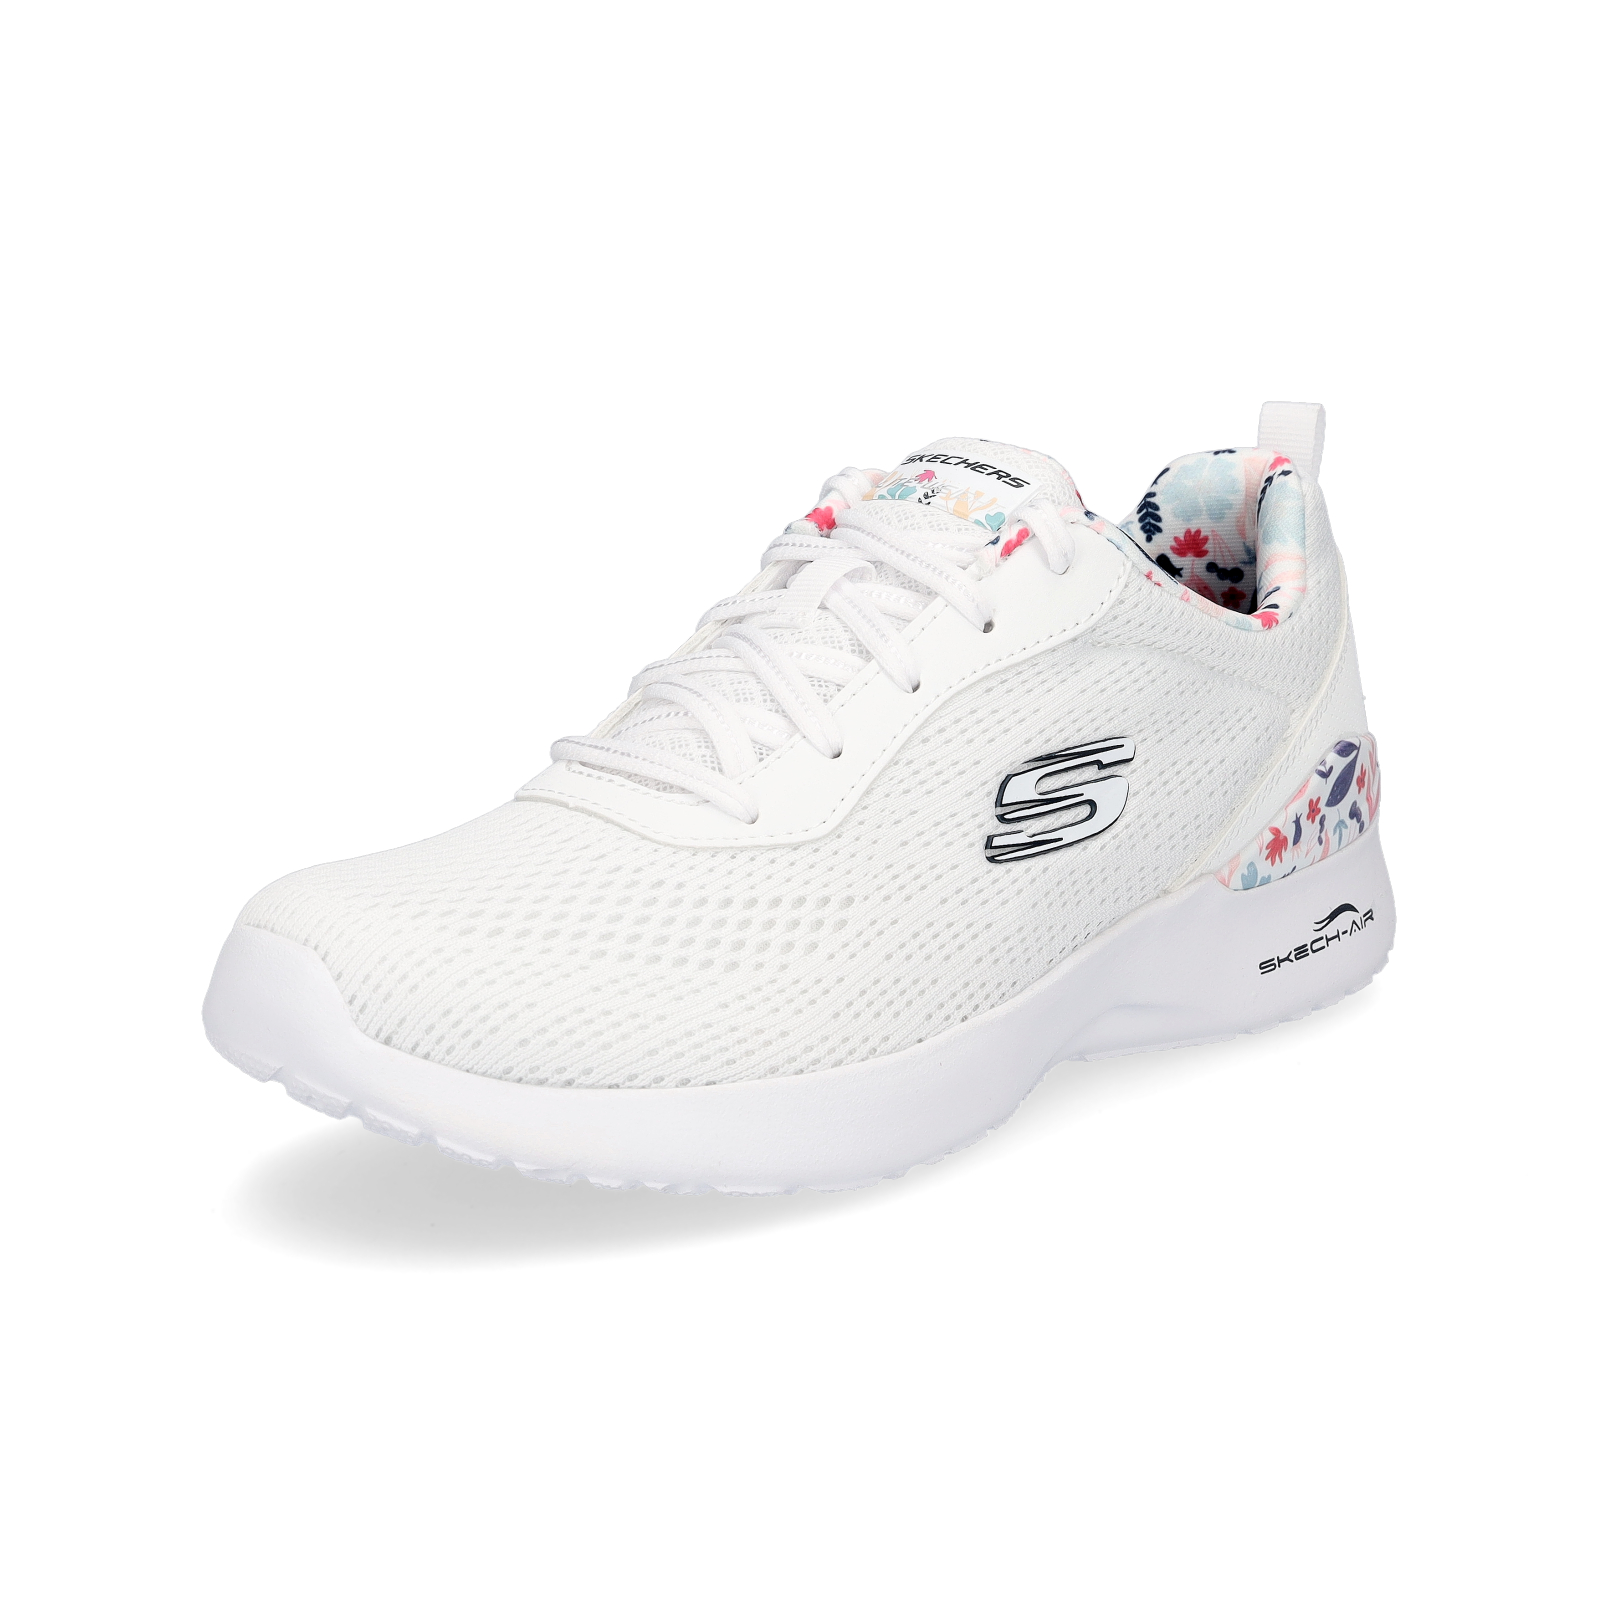 Кроссовки Skechers Skech Air Dynamight Laid Out, белый